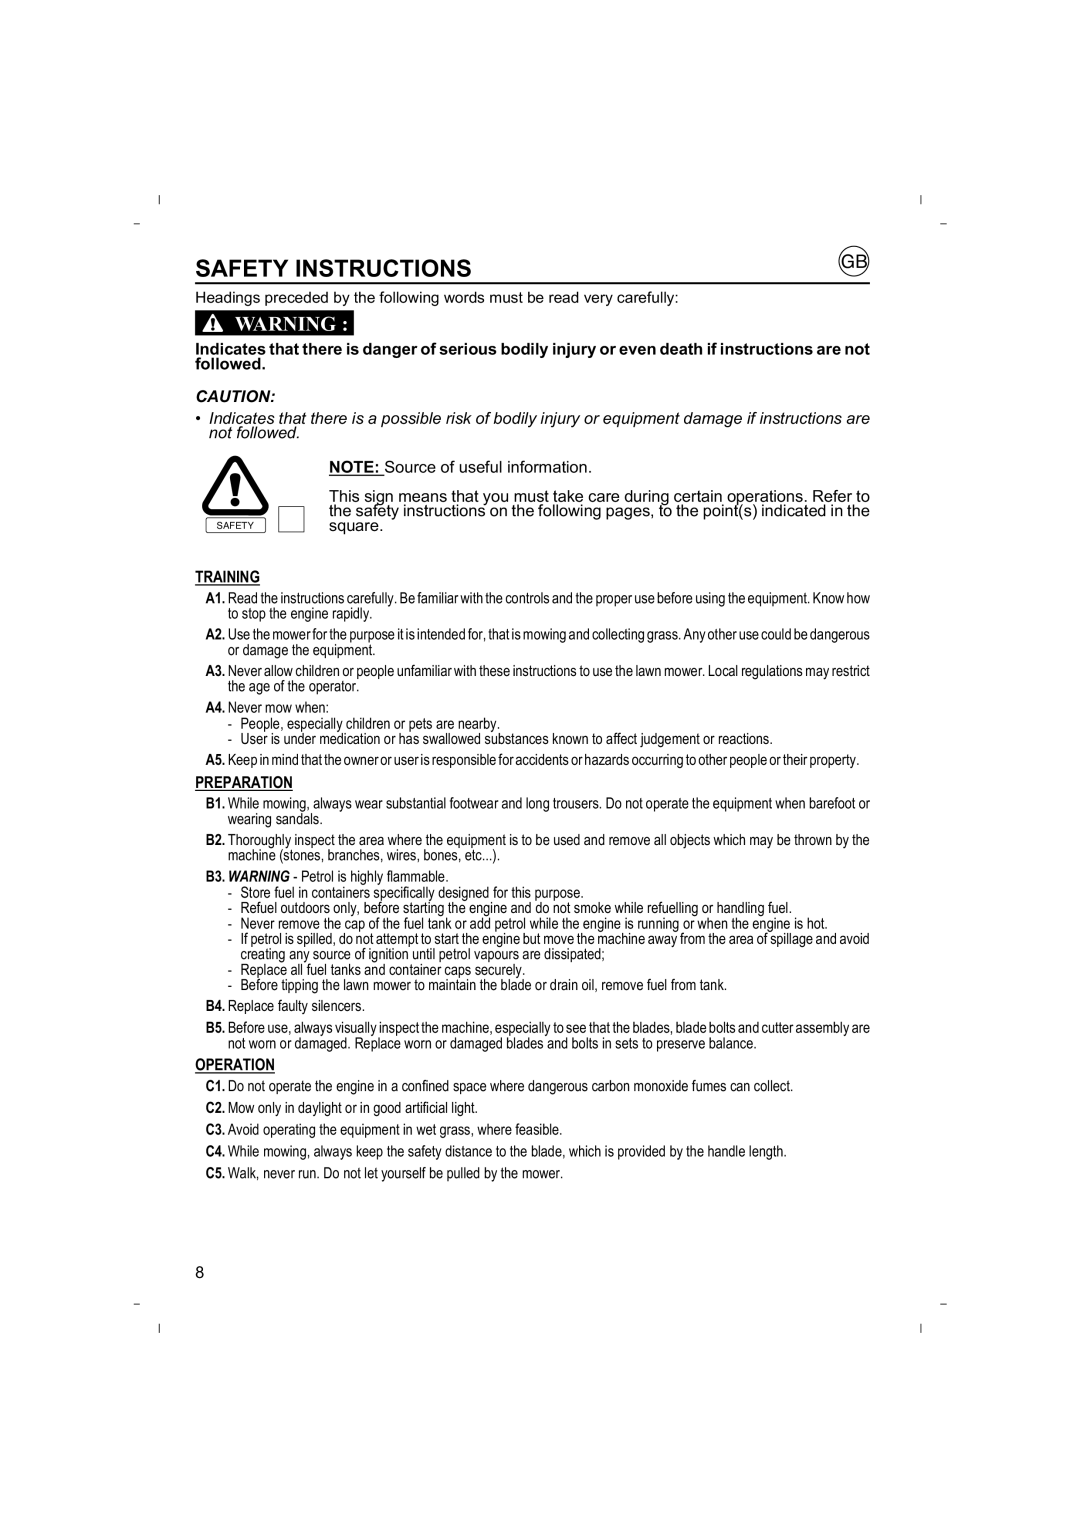 Honda Power Equipment HRB425C owner manual Safety Instructions, Training, Preparation, Operation 